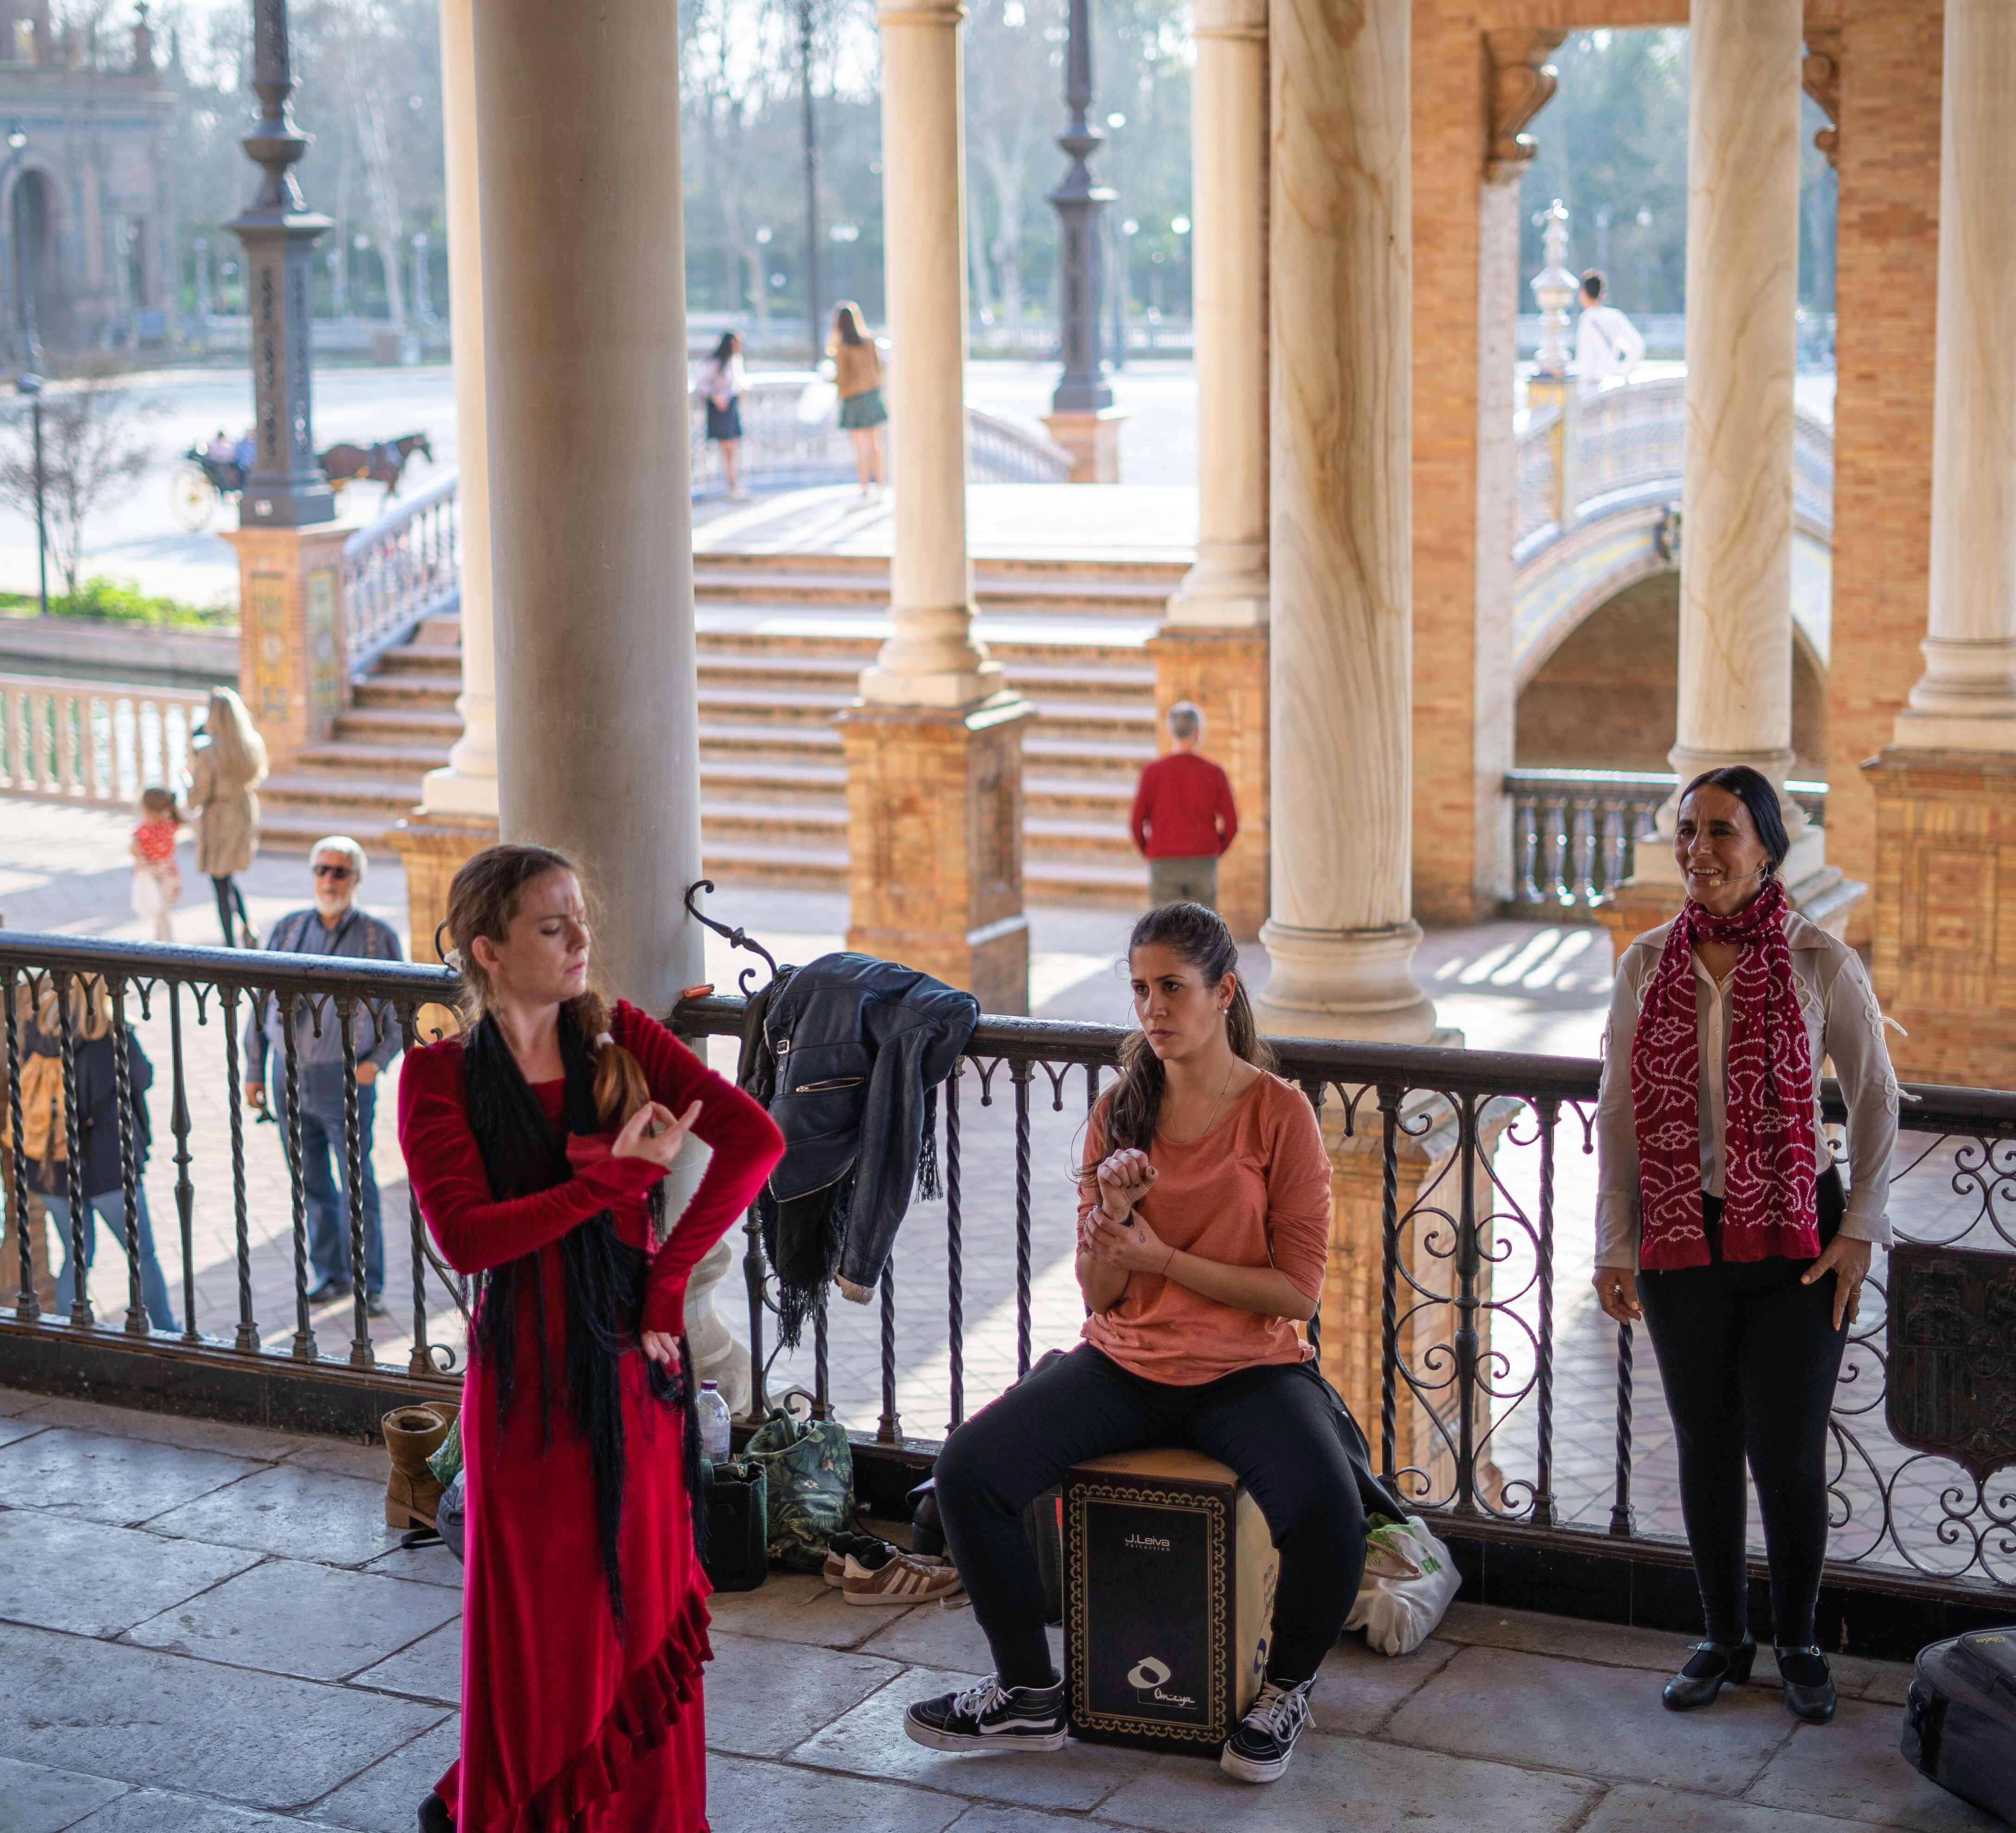 flamenco shows are a free thing to do in seville